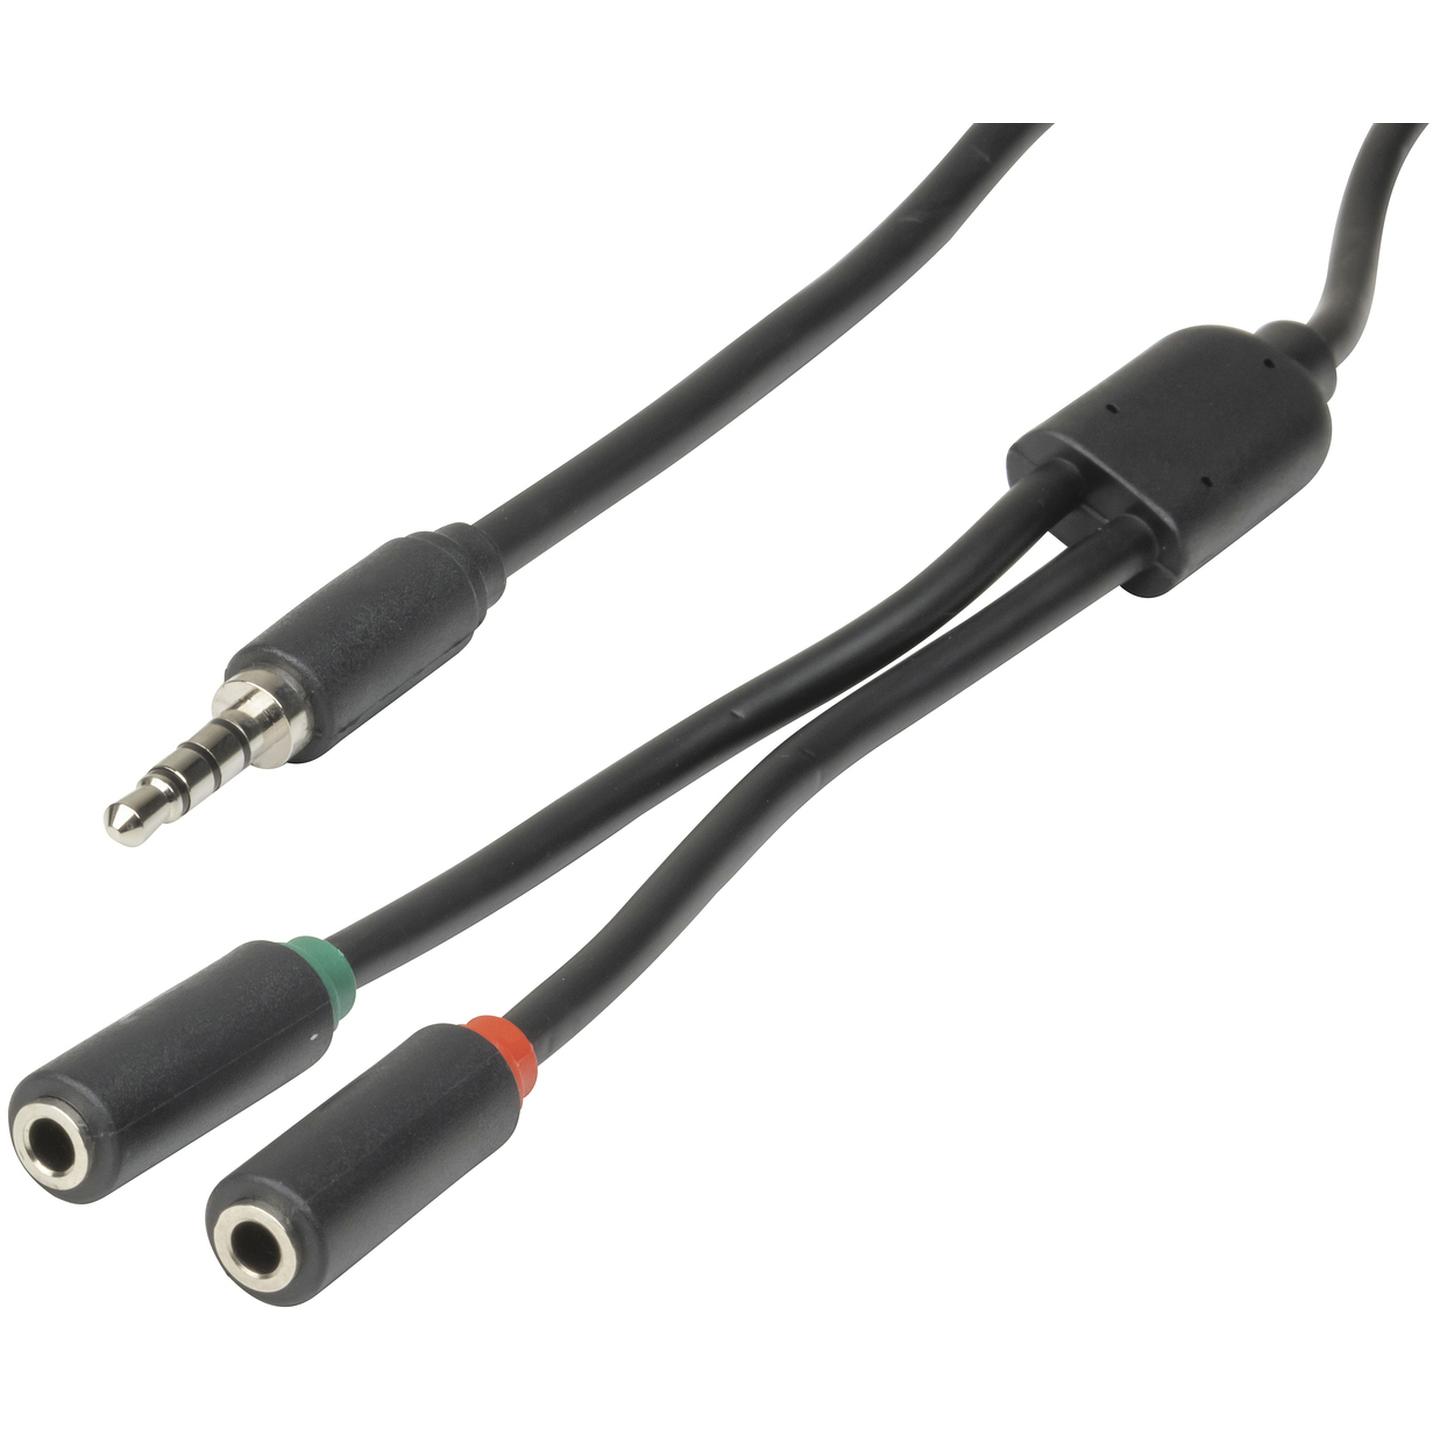 3.5mm 4 Pole Plug to 2 x 3.5mm Socket Cable - 250mm